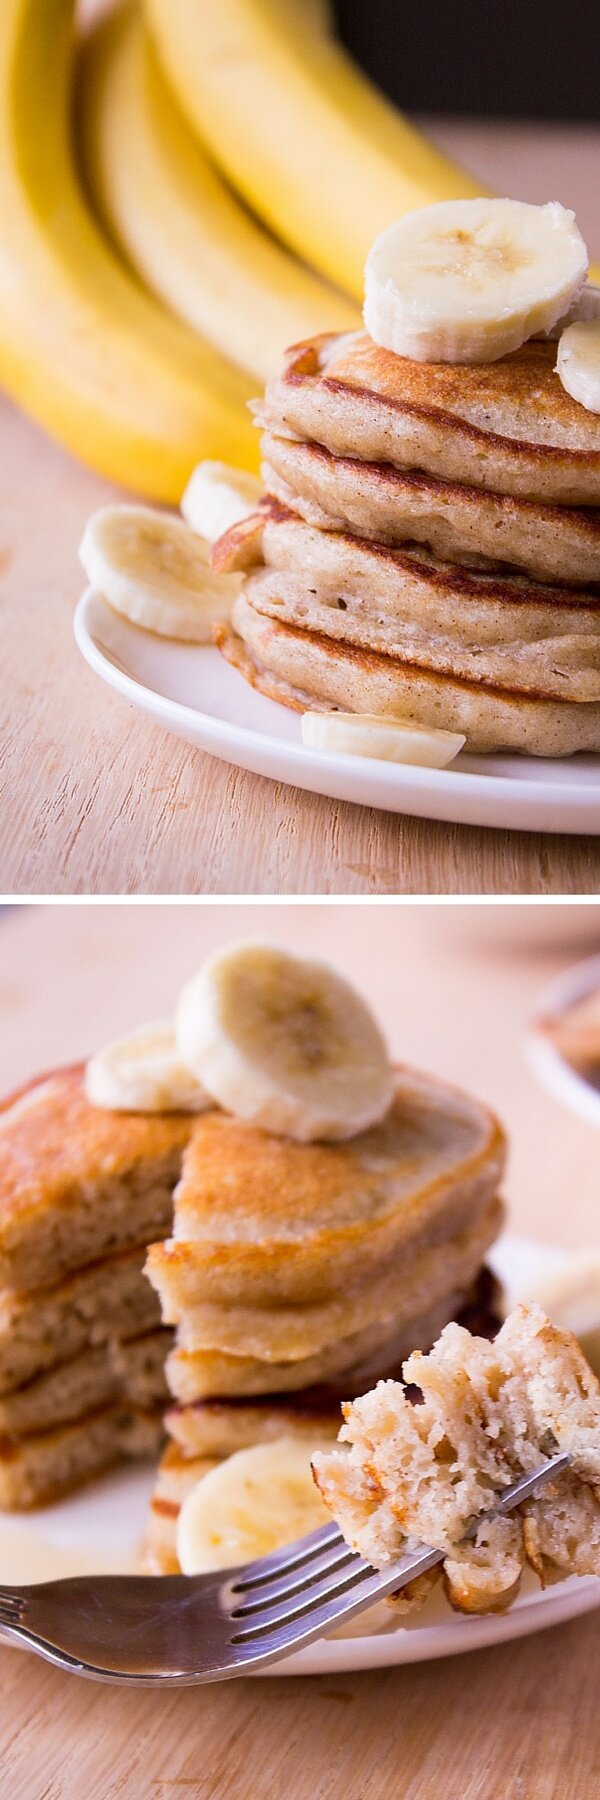 Light & Fluffy Banana Pancakes. These are like banana bread in pancake form. Super moist, filled with vanilla & cinnamon flavor - Start your morning with this easy recipe! www.justsotasty.com